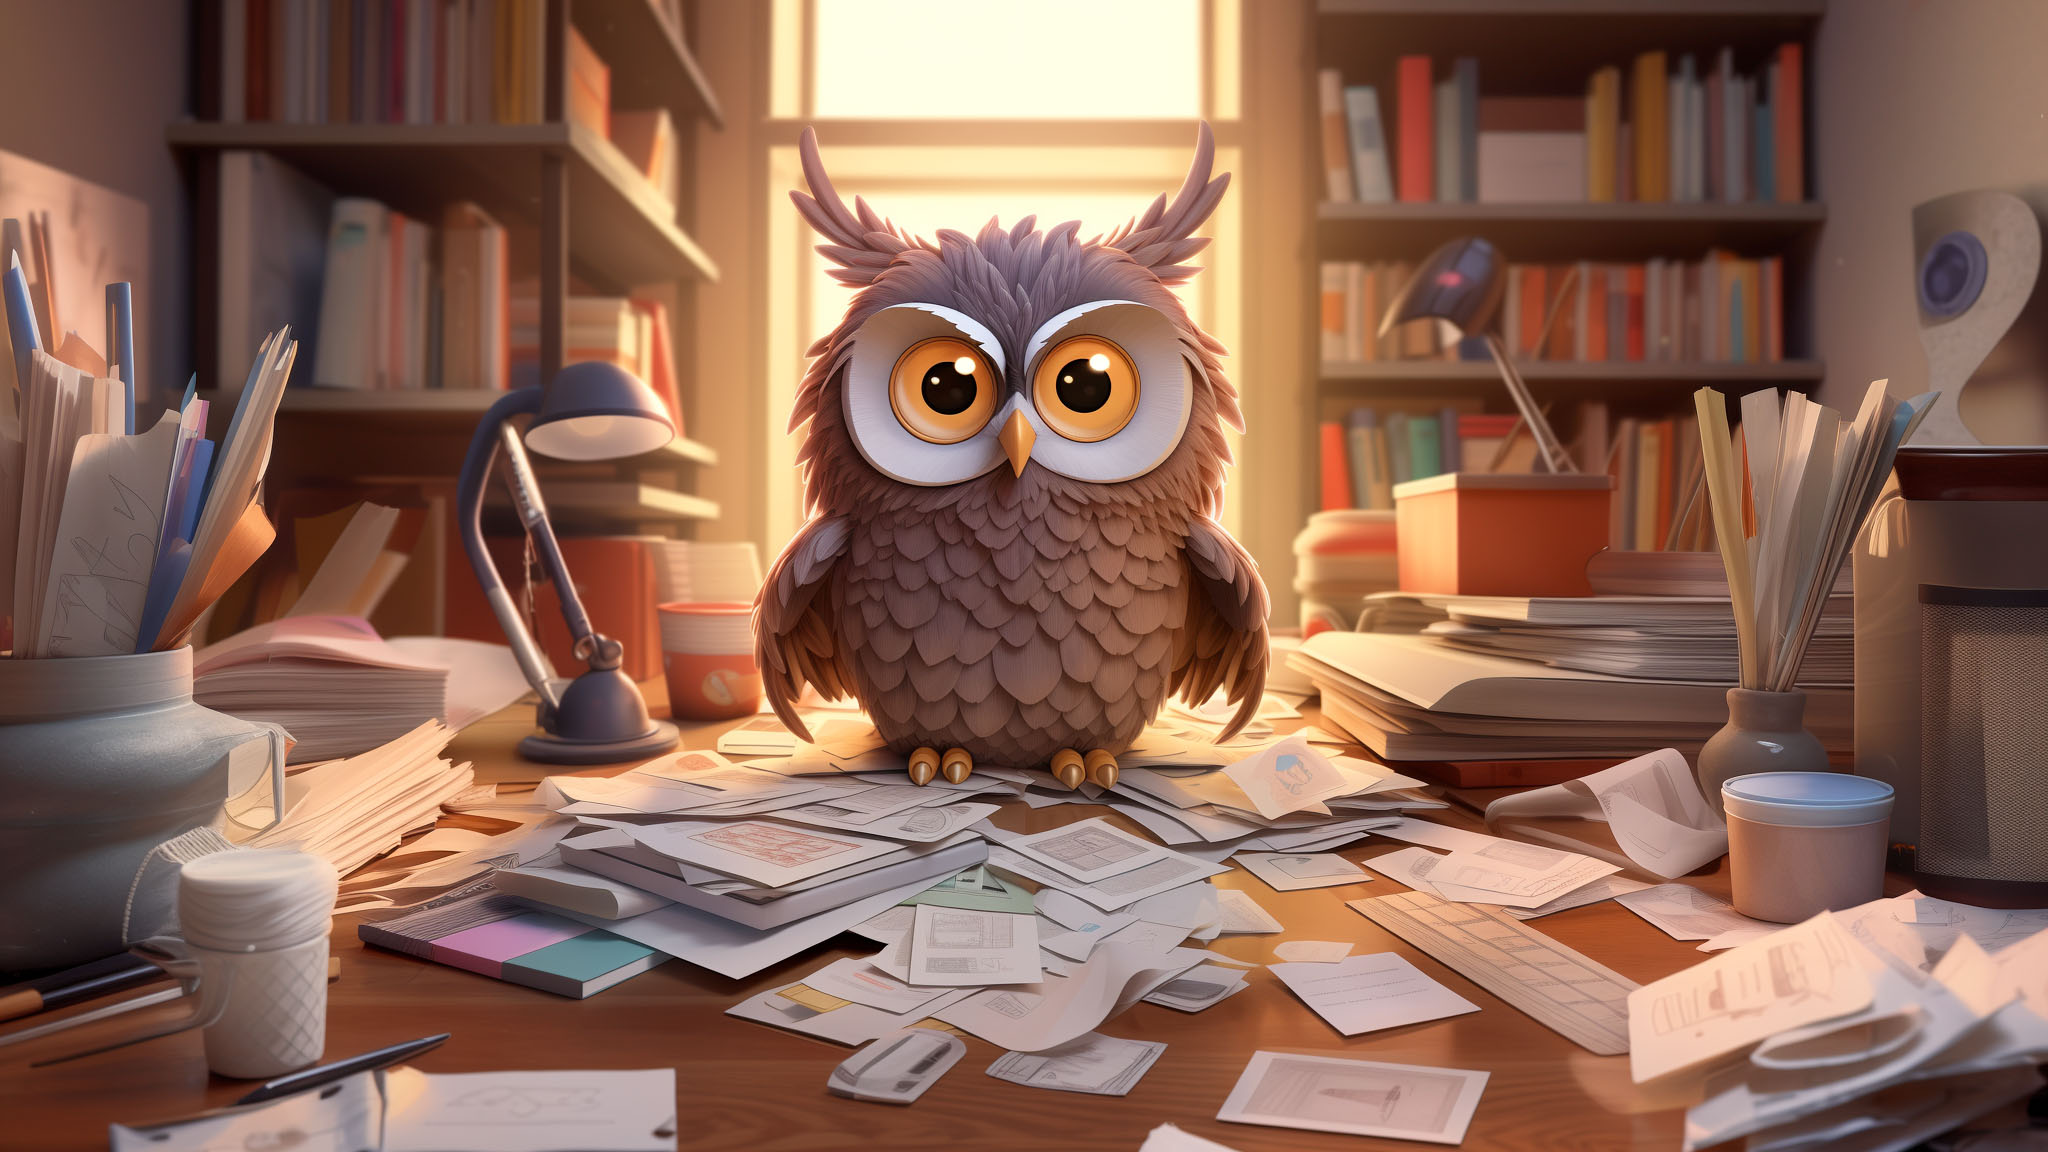 A cartoon owl sitting on a desk covered in scattered documents.